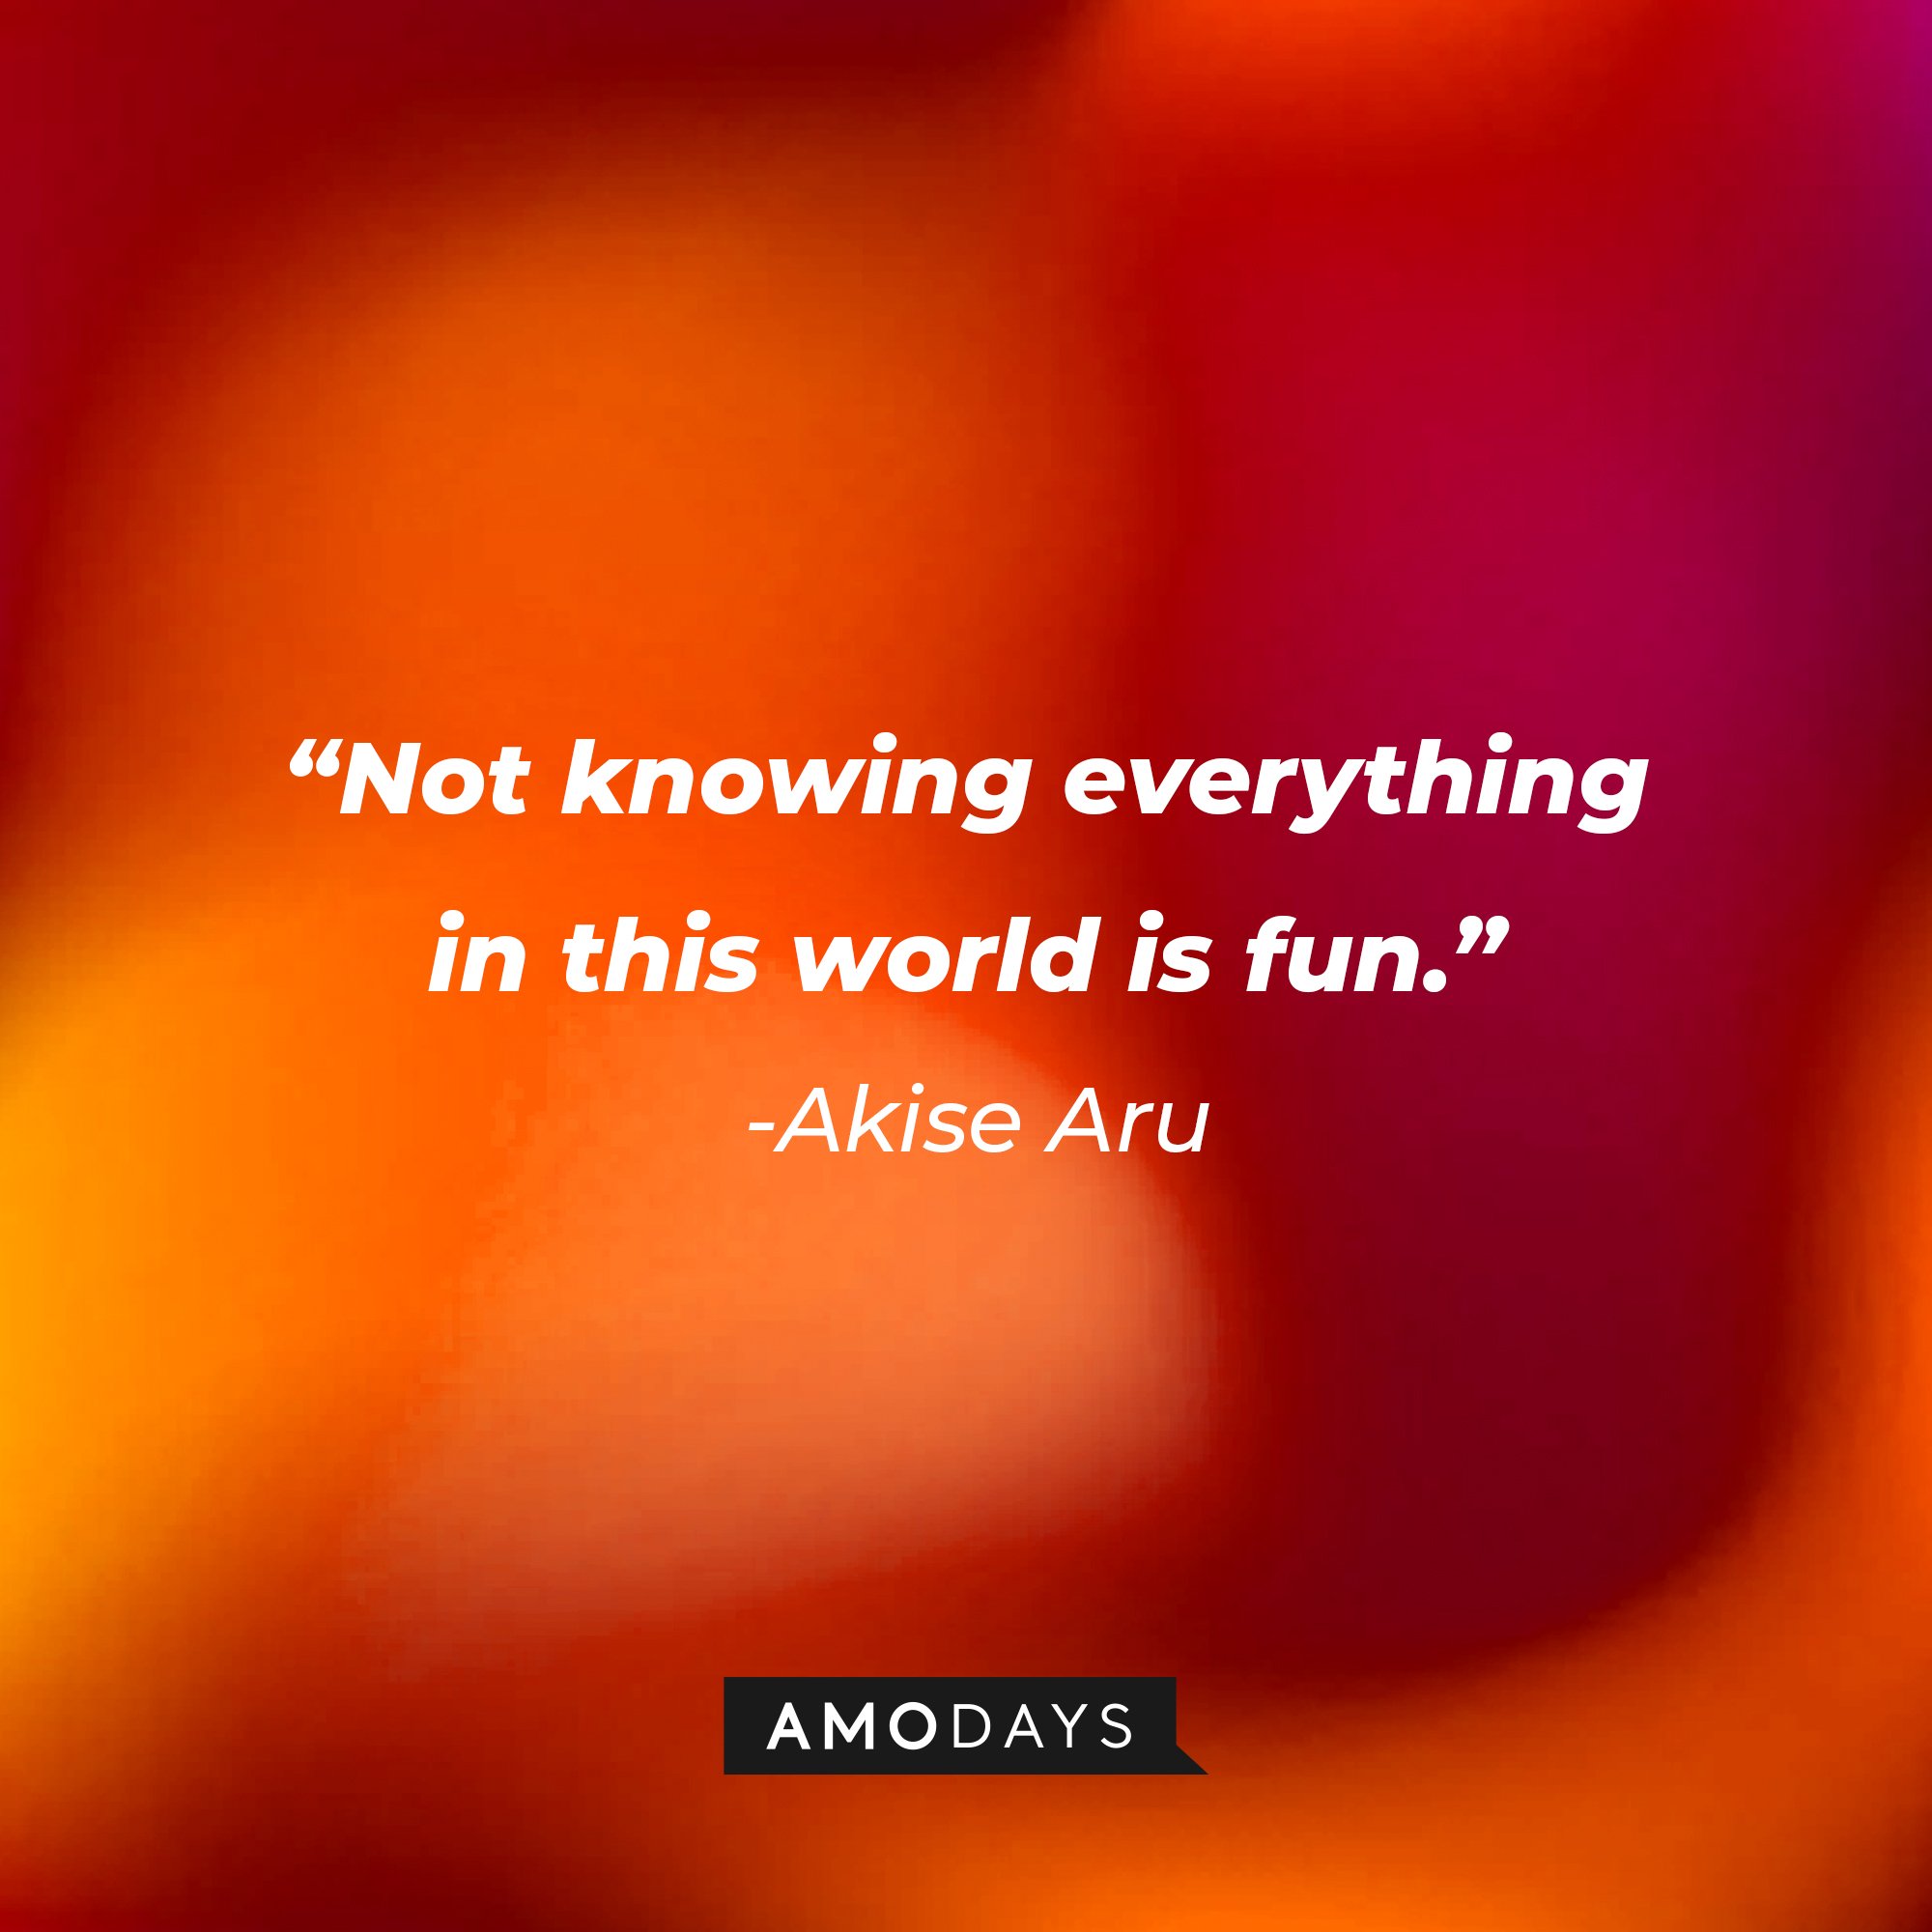 Akise Aru’s quote: “Not knowing everything in this world is fun.” | Image: AmoDays  